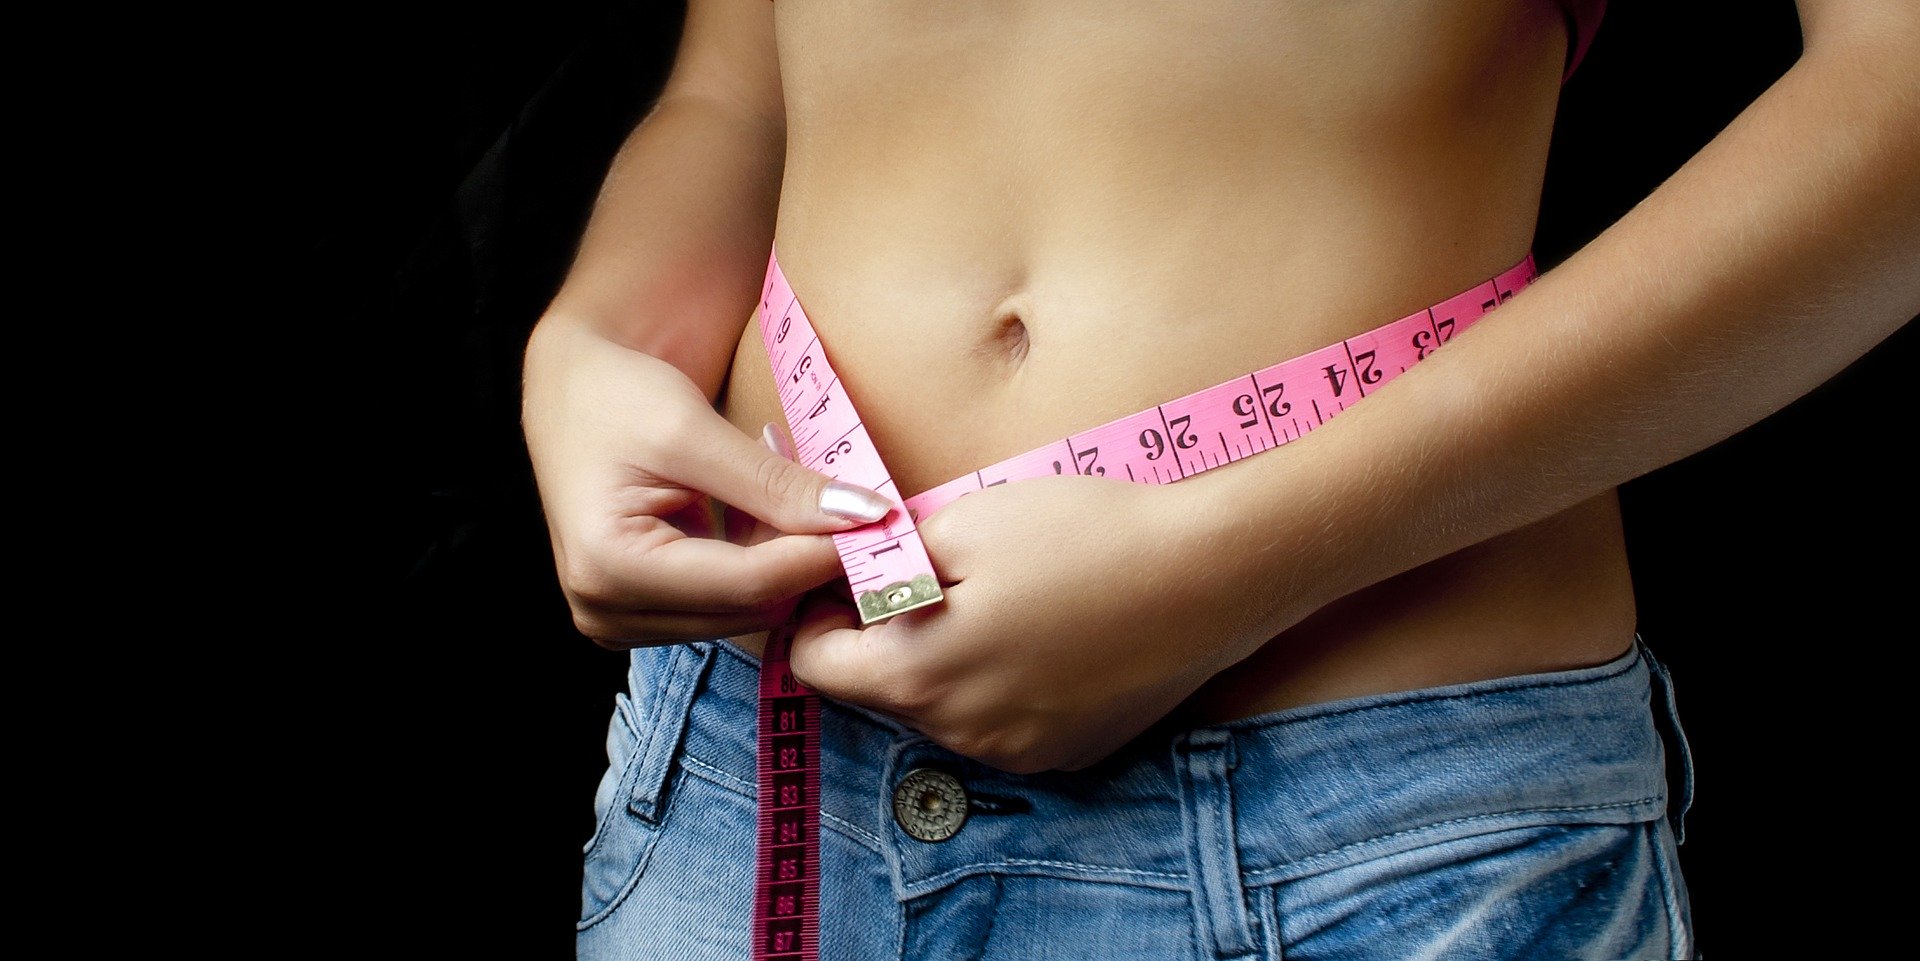 Six viral weight-loss tips: do they work?